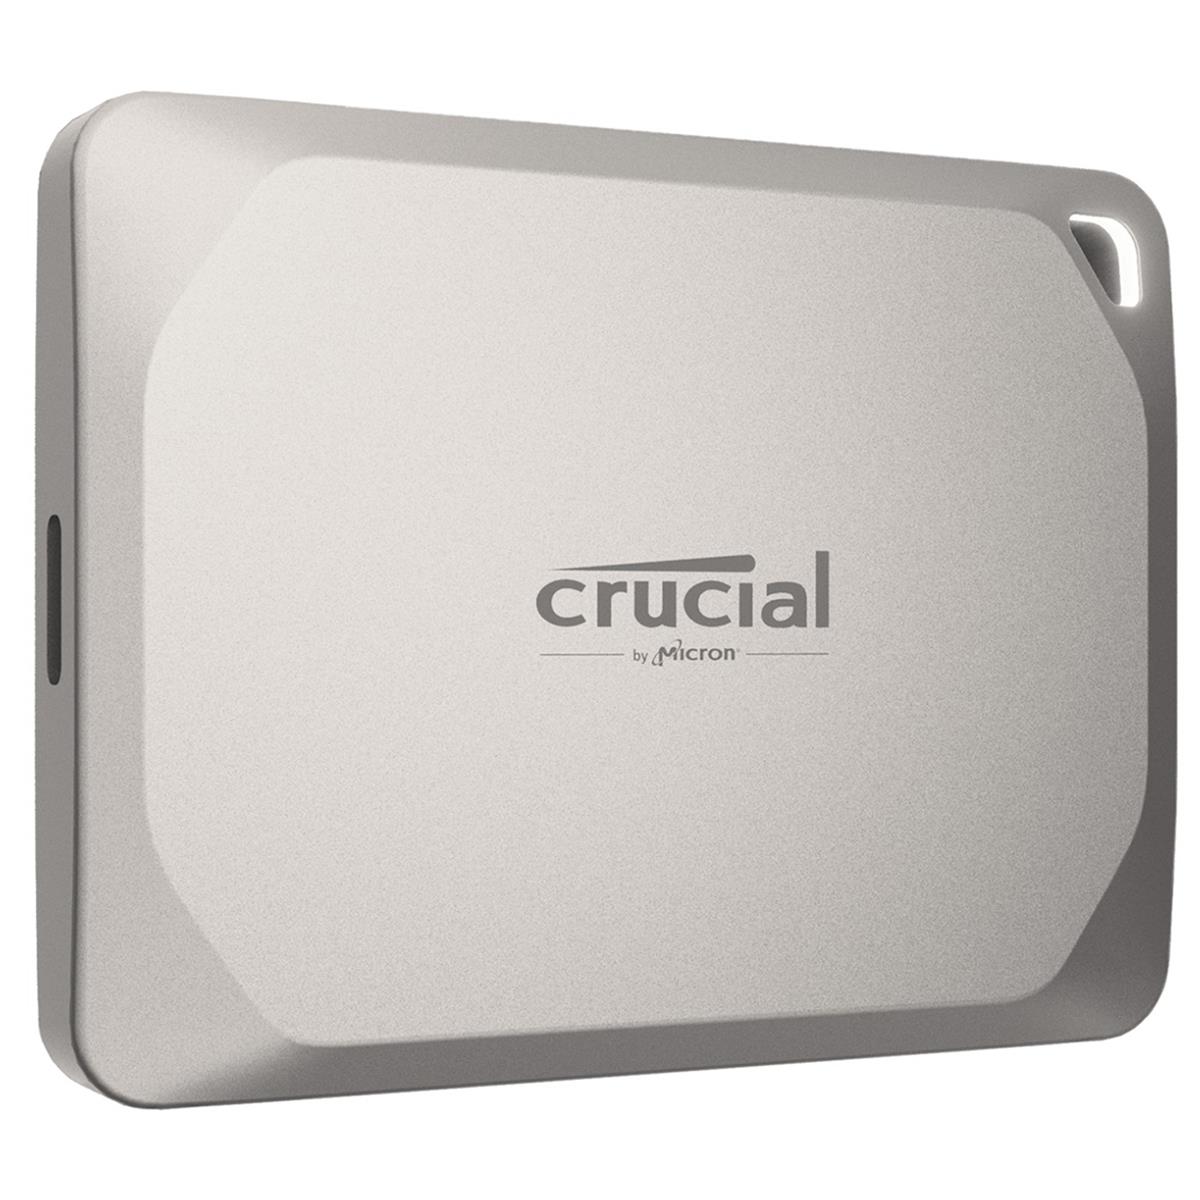 Image of Crucial X9 Pro 4TB USB 3.2 Gen 2 Type-C Portable External SSD for Apple Mac